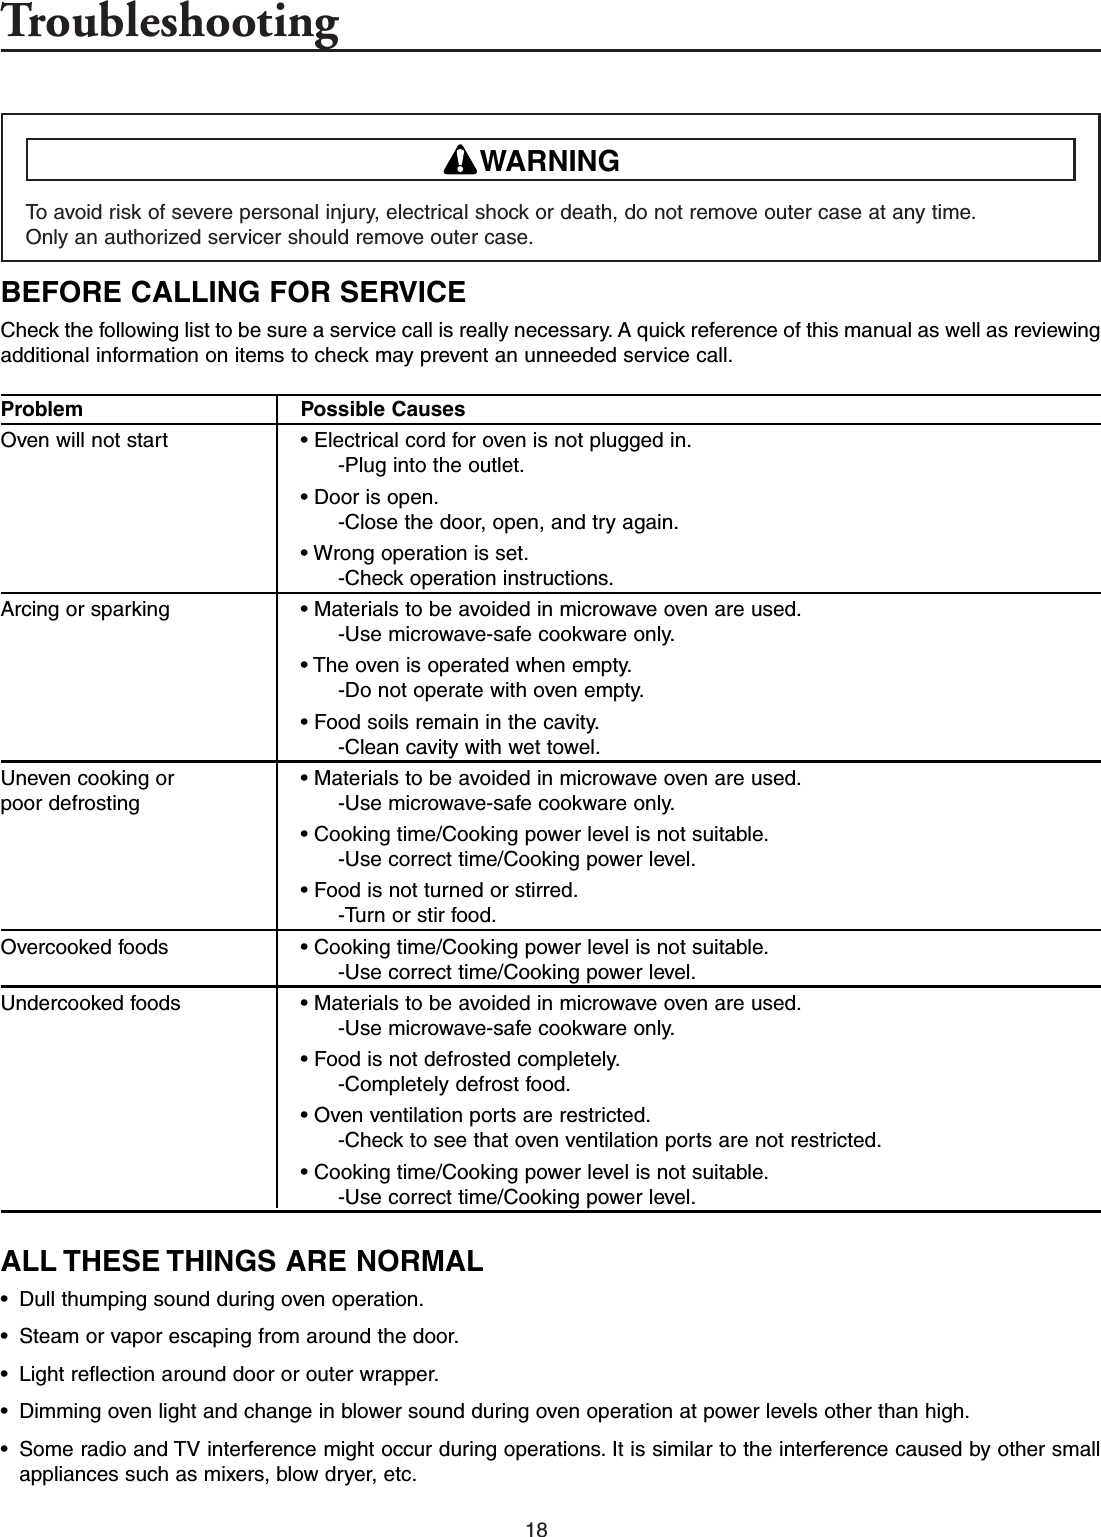 18TroubleshootingTo   avoid risk of severe personal injury, electrical shock or death, do not remove outer case at any time.Only an authorized servicer should remove outer case.WARNINGBEFORE CALLING FOR SERVICECheck the following list to be sure a service call is really necessary. A quick reference of this manual as well as reviewingadditional information on items to check may prevent an unneeded service call.ALL THESE THINGS ARE NORMAL•Dull thumping sound during oven operation.•Steam or vapor escaping from around the door.•Light reflection around door or outer wrapper.•Dimming oven light and change in blower sound during oven operation at power levels other than high.•Some radio and TV interference might occur during operations. It is similar to the interference caused by other smallappliances such as mixers, blow dryer, etc.Problem Possible CausesOven will not start • Electrical cord for oven is not plugged in.-Plug into the outlet.• Door is open.-Close the door, open, and try again.• Wrong operation is set.-Check operation instructions.Arcing or sparking • Materials to be avoided in microwave oven are used.-Use microwave-safe cookware only.• The oven is operated when empty.-Do not operate with oven empty.• Food soils remain in the cavity.-Clean cavity with wet towel.Uneven cooking or  • Materials to be avoided in microwave oven are used.poor defrosting -Use microwave-safe cookware only.• Cooking time/Cooking power level is not suitable.-Use correct time/Cooking power level.• Food is not turned or stirred.-Turn or stir food.Overcooked foods • Cooking time/Cooking power level is not suitable.-Use correct time/Cooking power level.Undercooked foods • Materials to be avoided in microwave oven are used.-Use microwave-safe cookware only.• Food is not defrosted completely.-Completely defrost food.• Oven ventilation ports are restricted.-Check to see that oven ventilation ports are not restricted.• Cooking time/Cooking power level is not suitable.-Use correct time/Cooking power level.